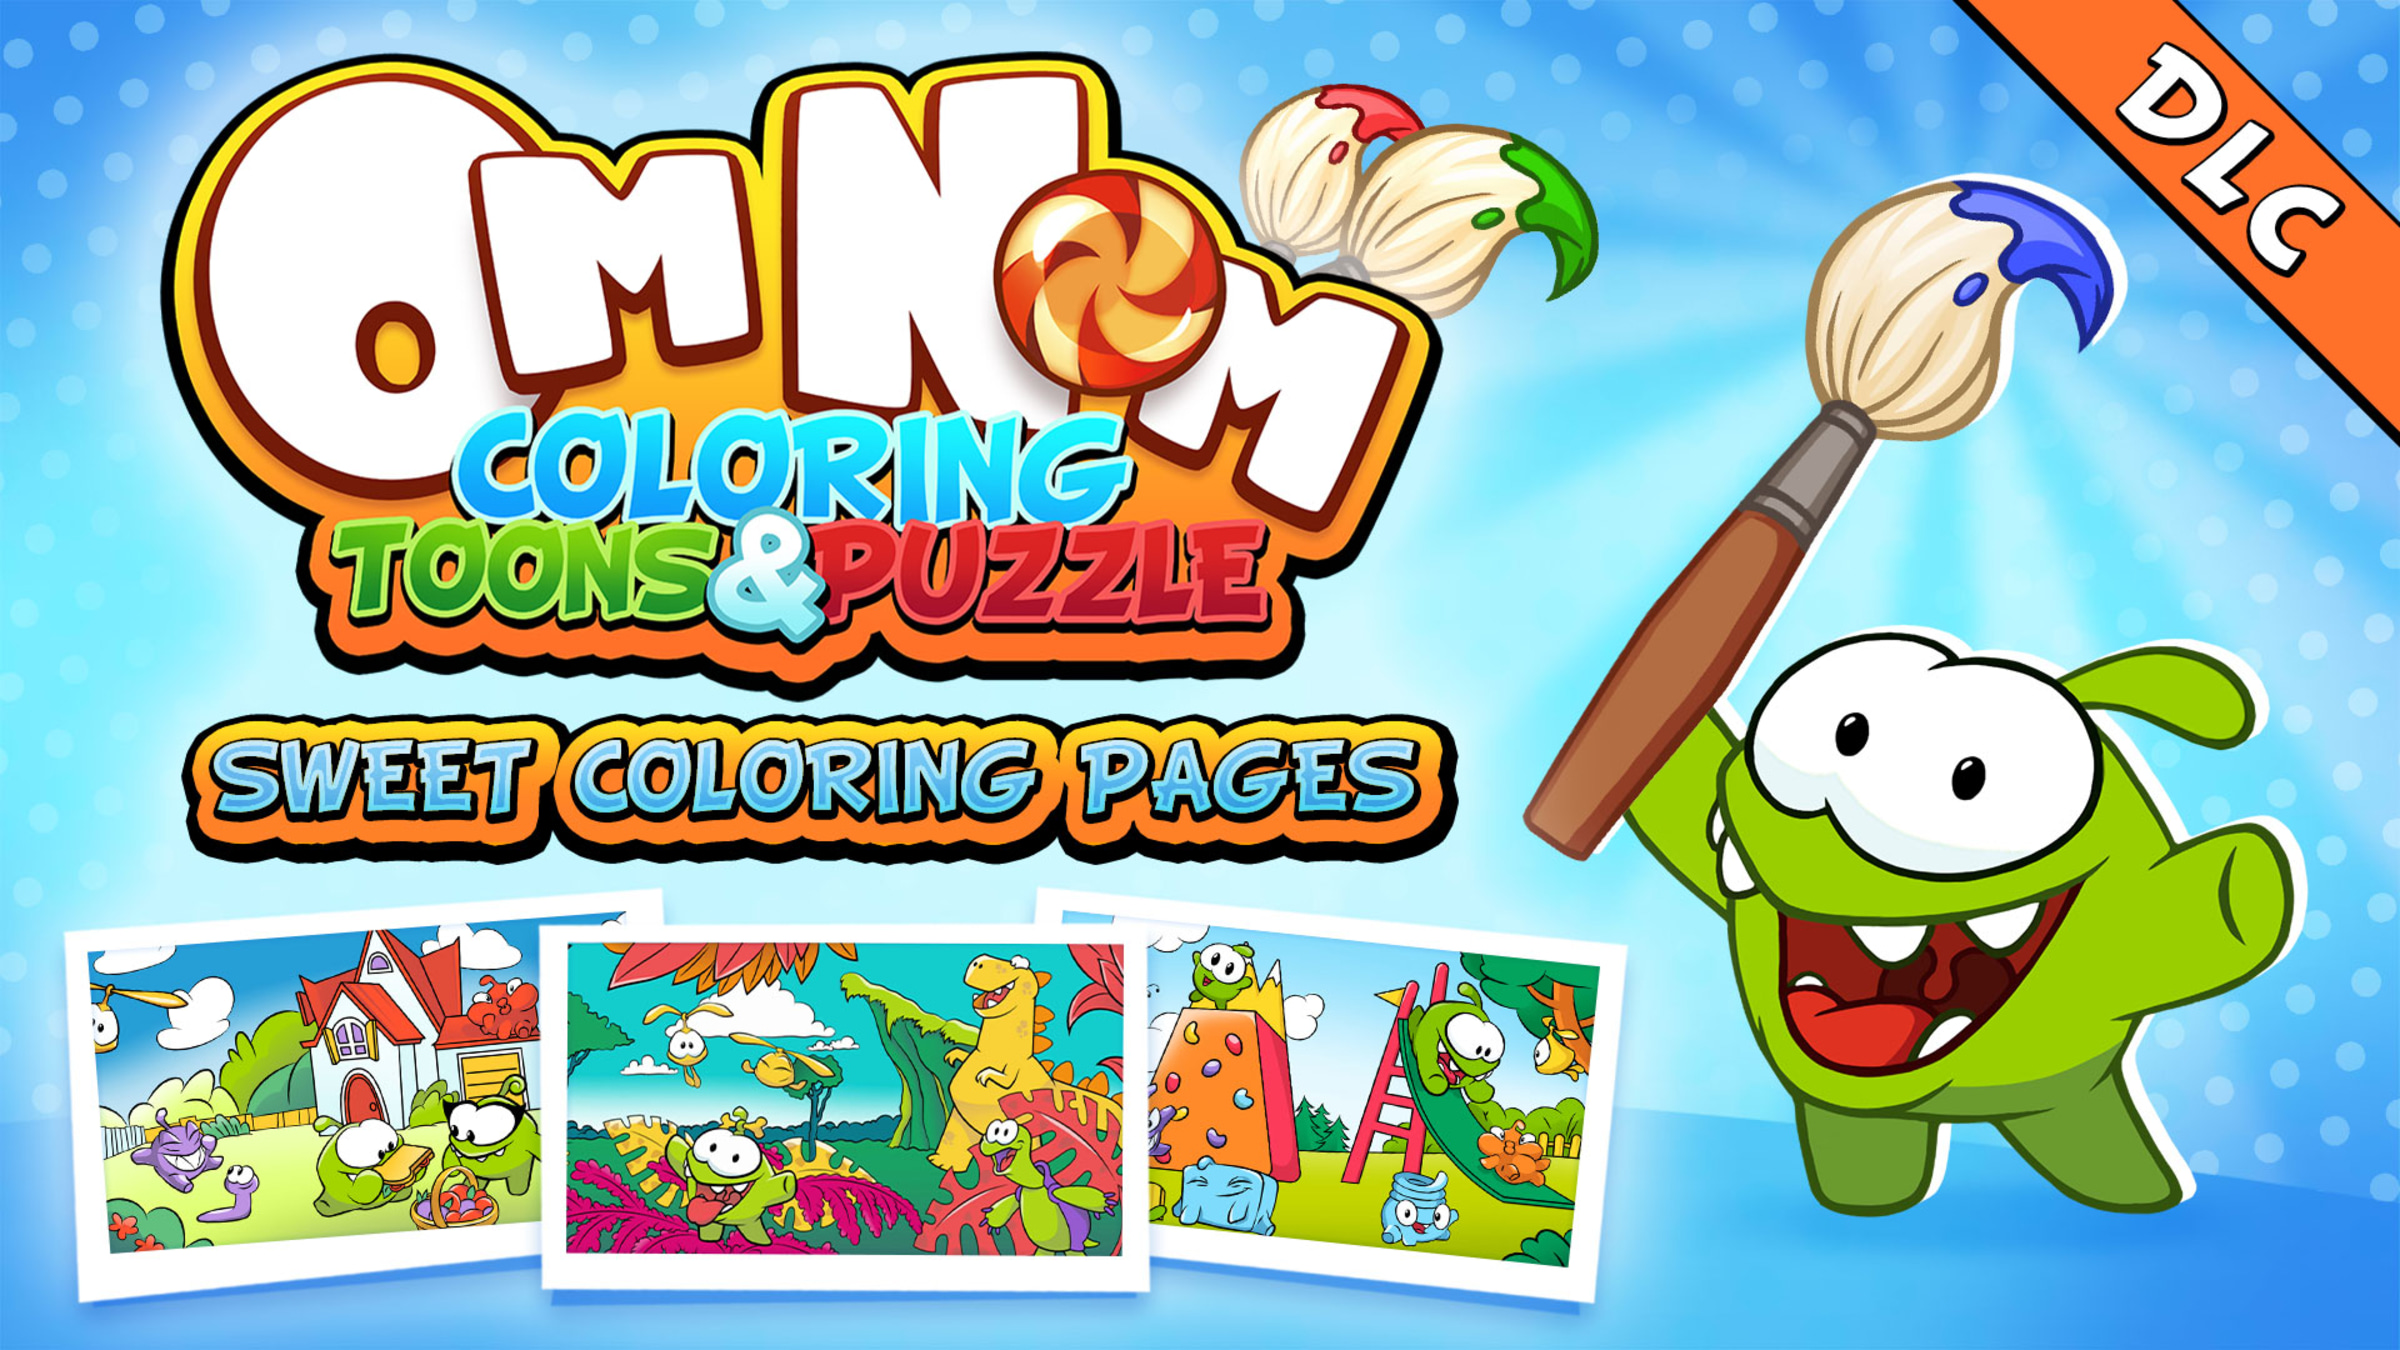 Om nom sweet coloring pages for switch